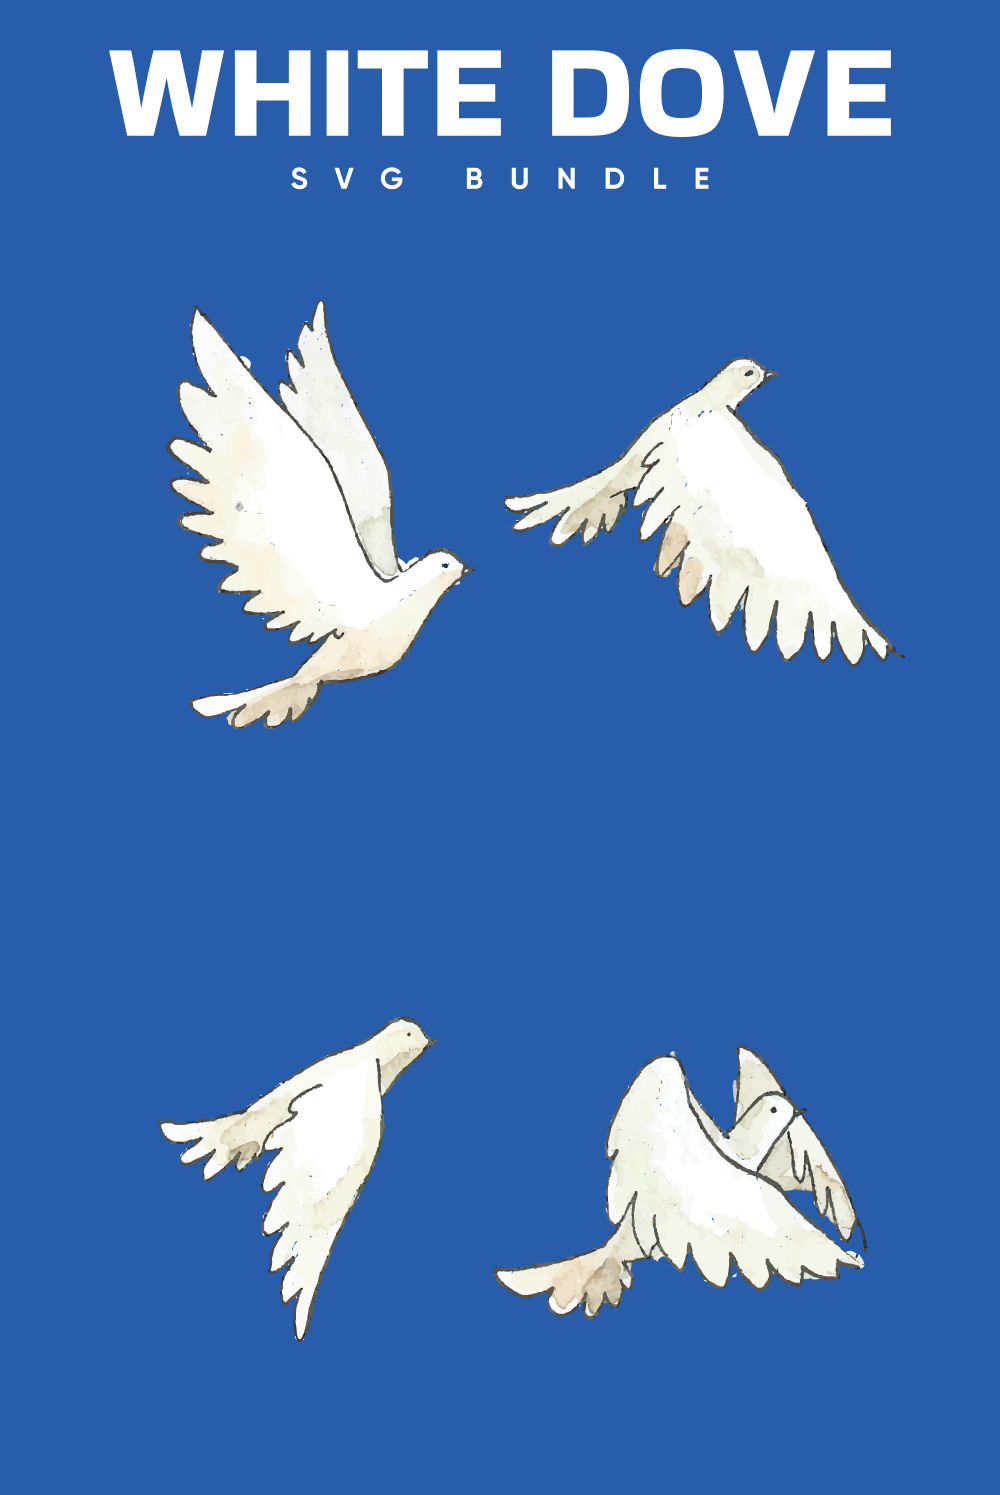 Three white doves flying in the sky.